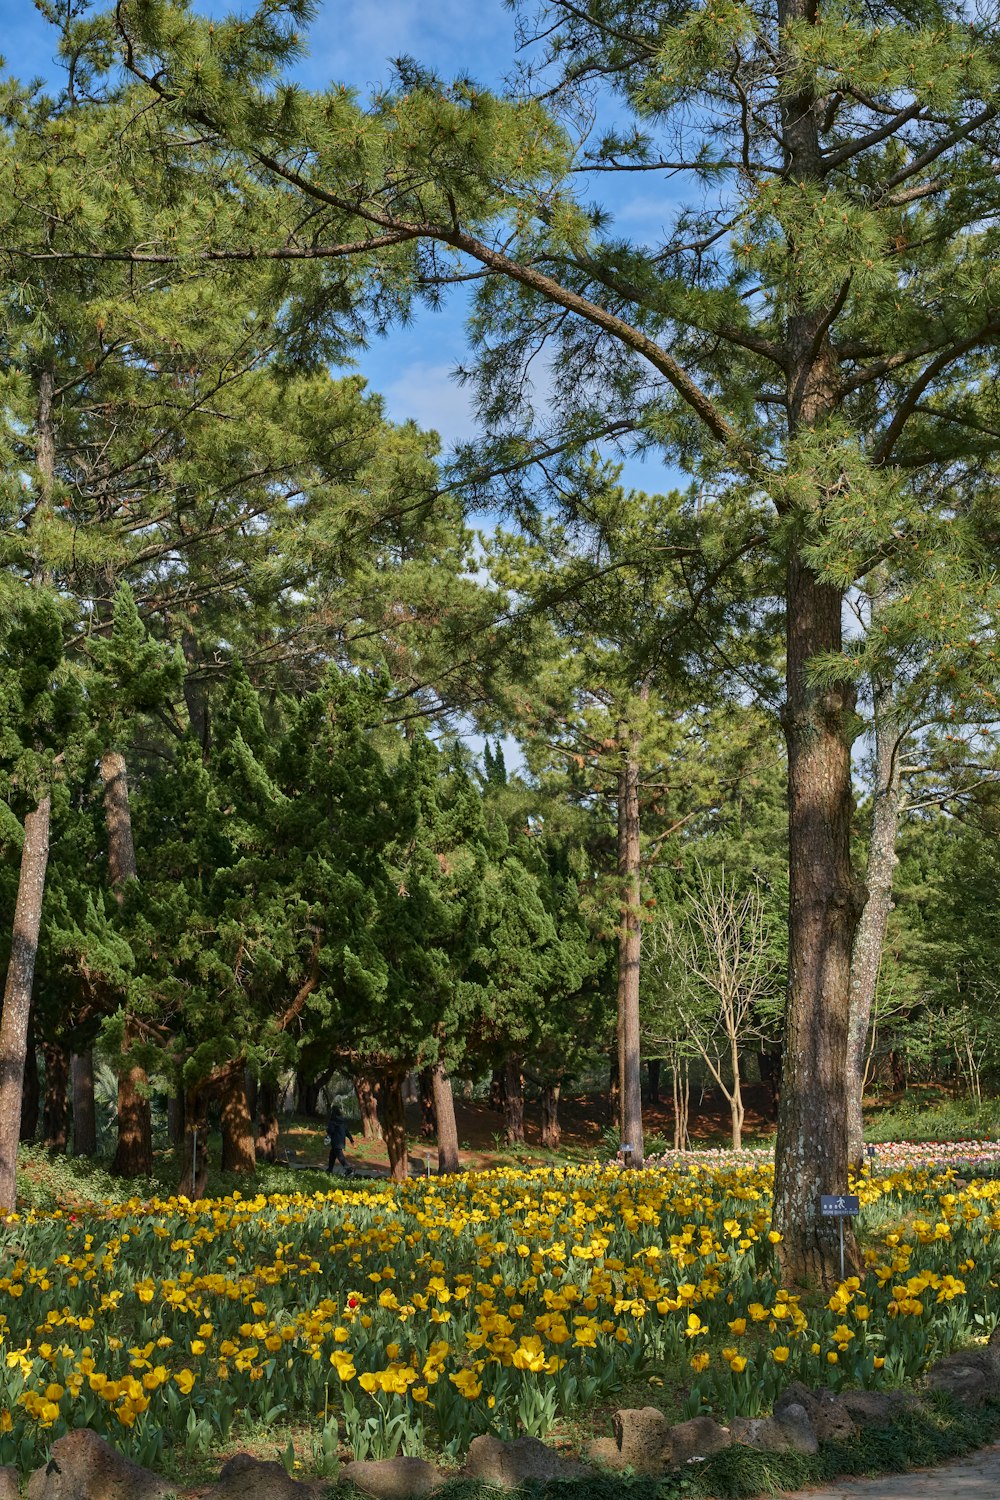 a park filled with lots of trees and yellow flowers